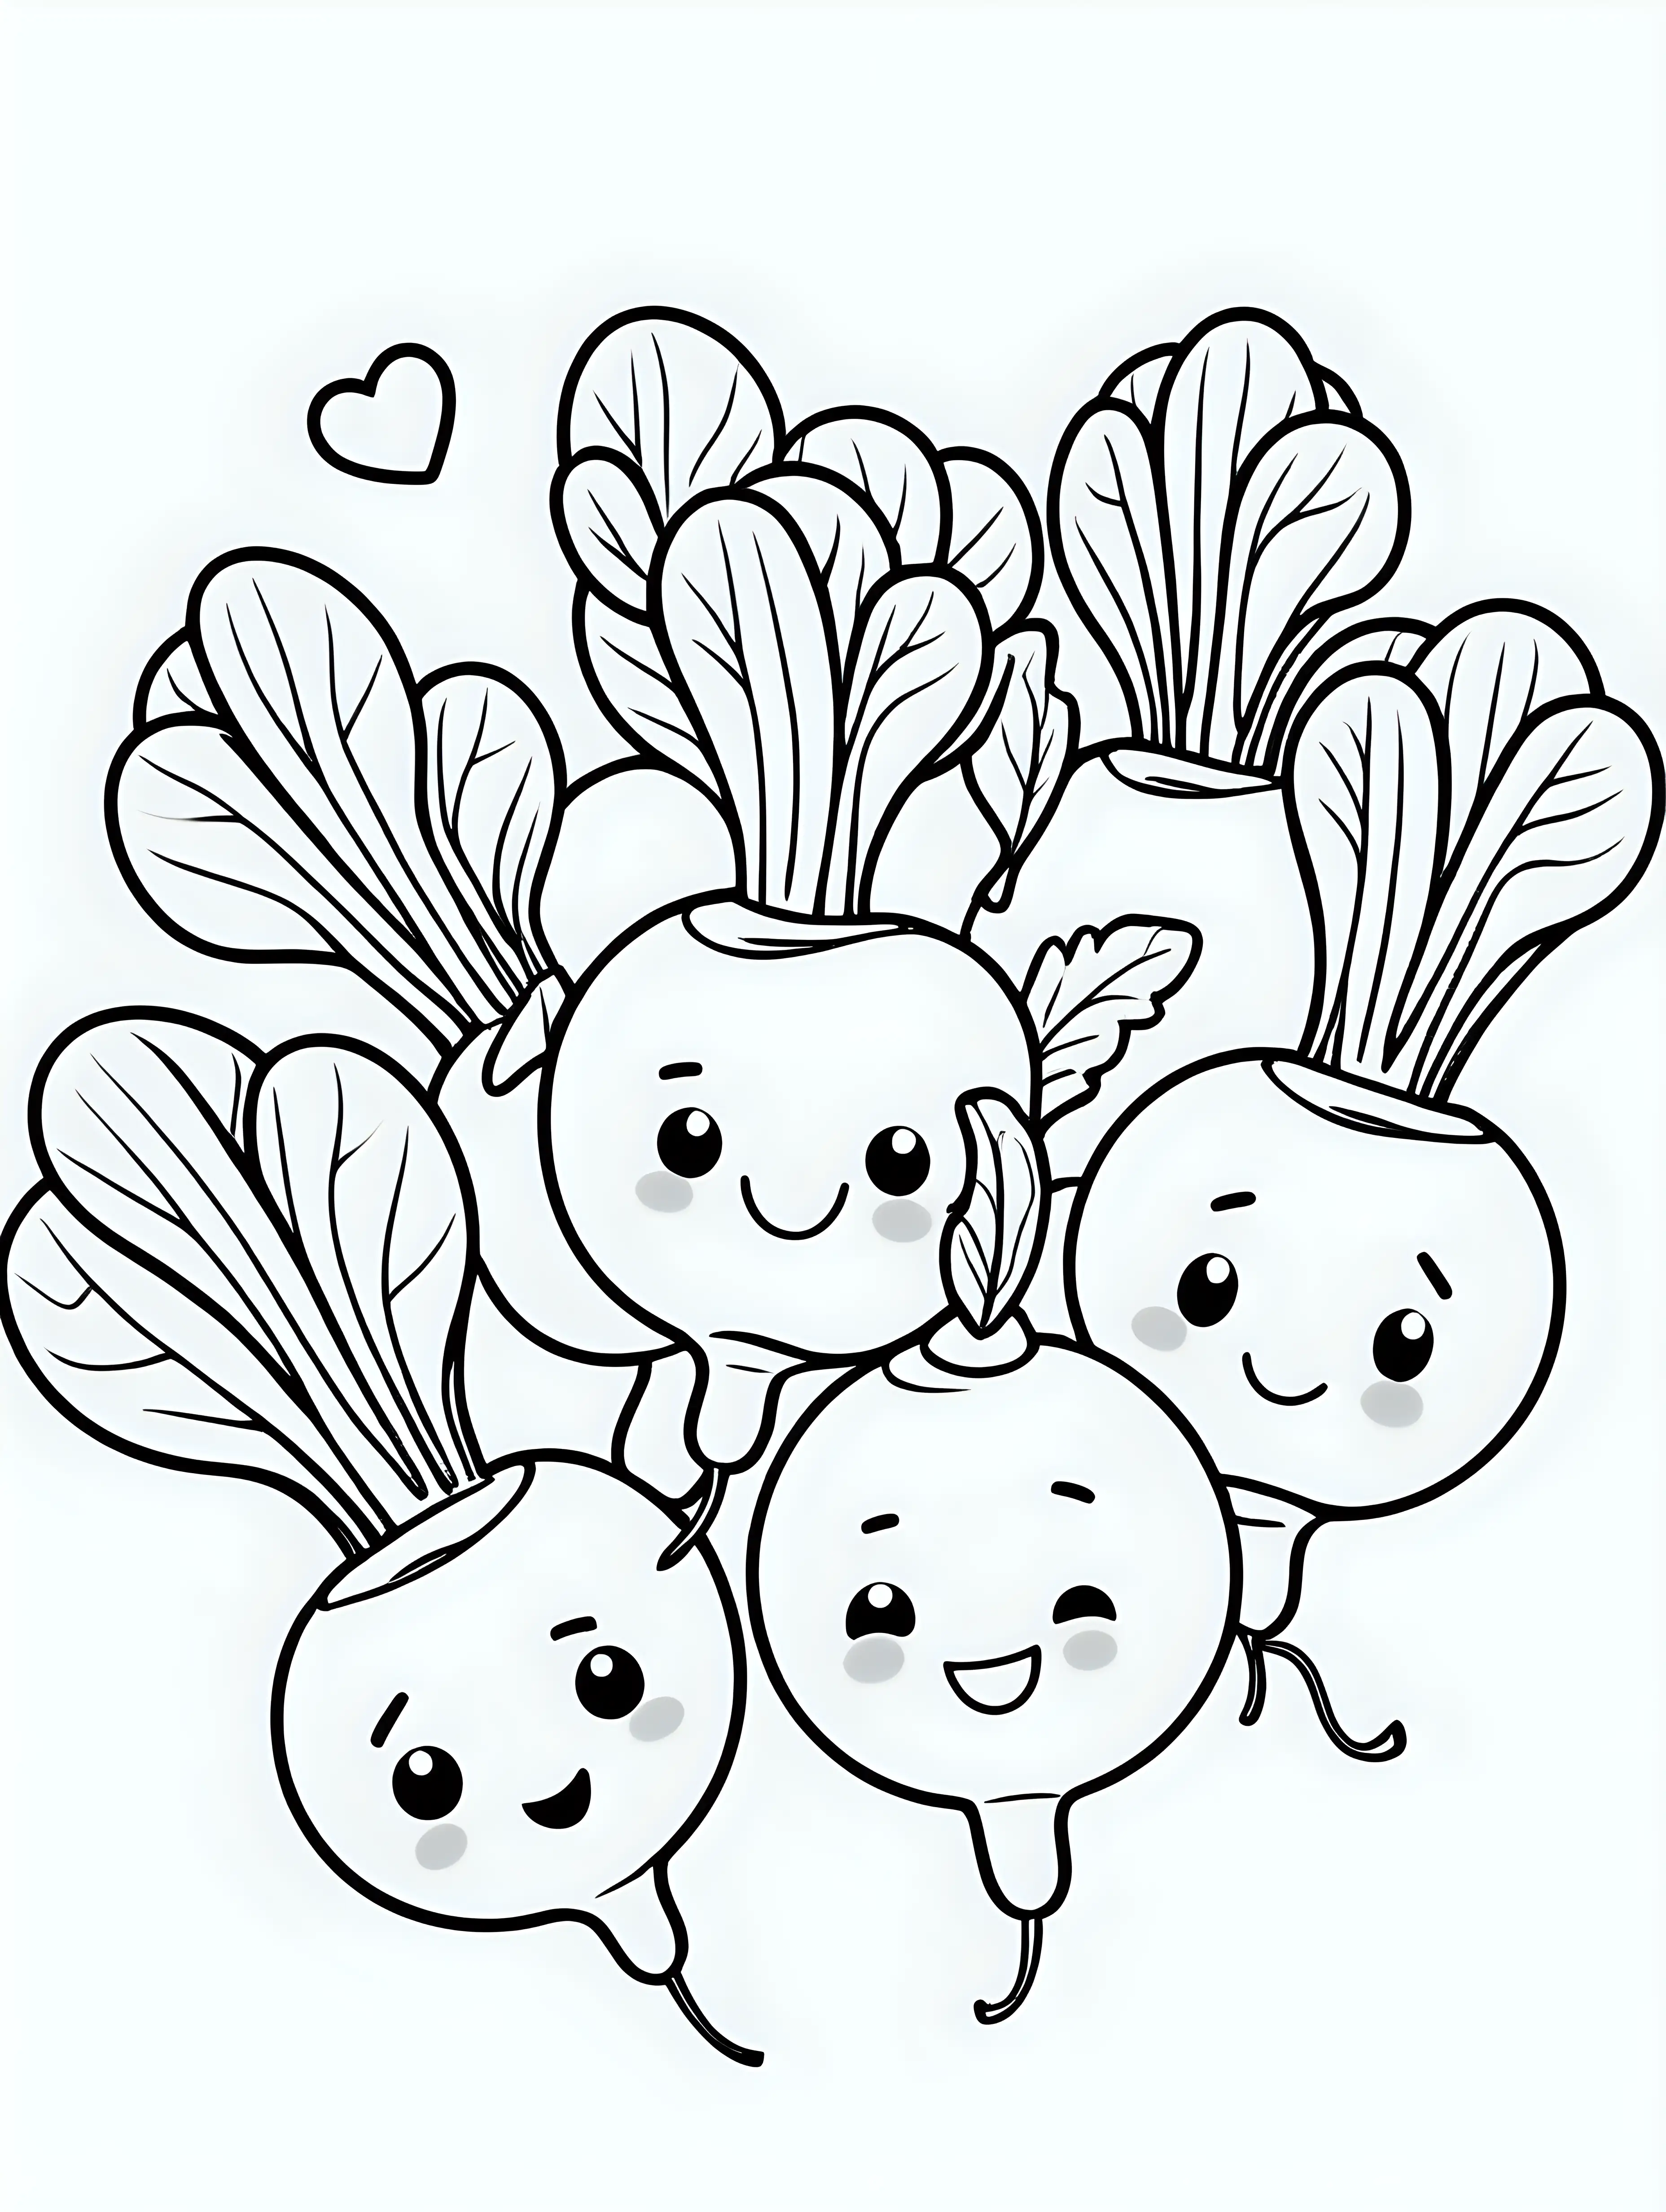 Whimsical Black and White Cartoon Playful Radish Emojis in a Coloring Book